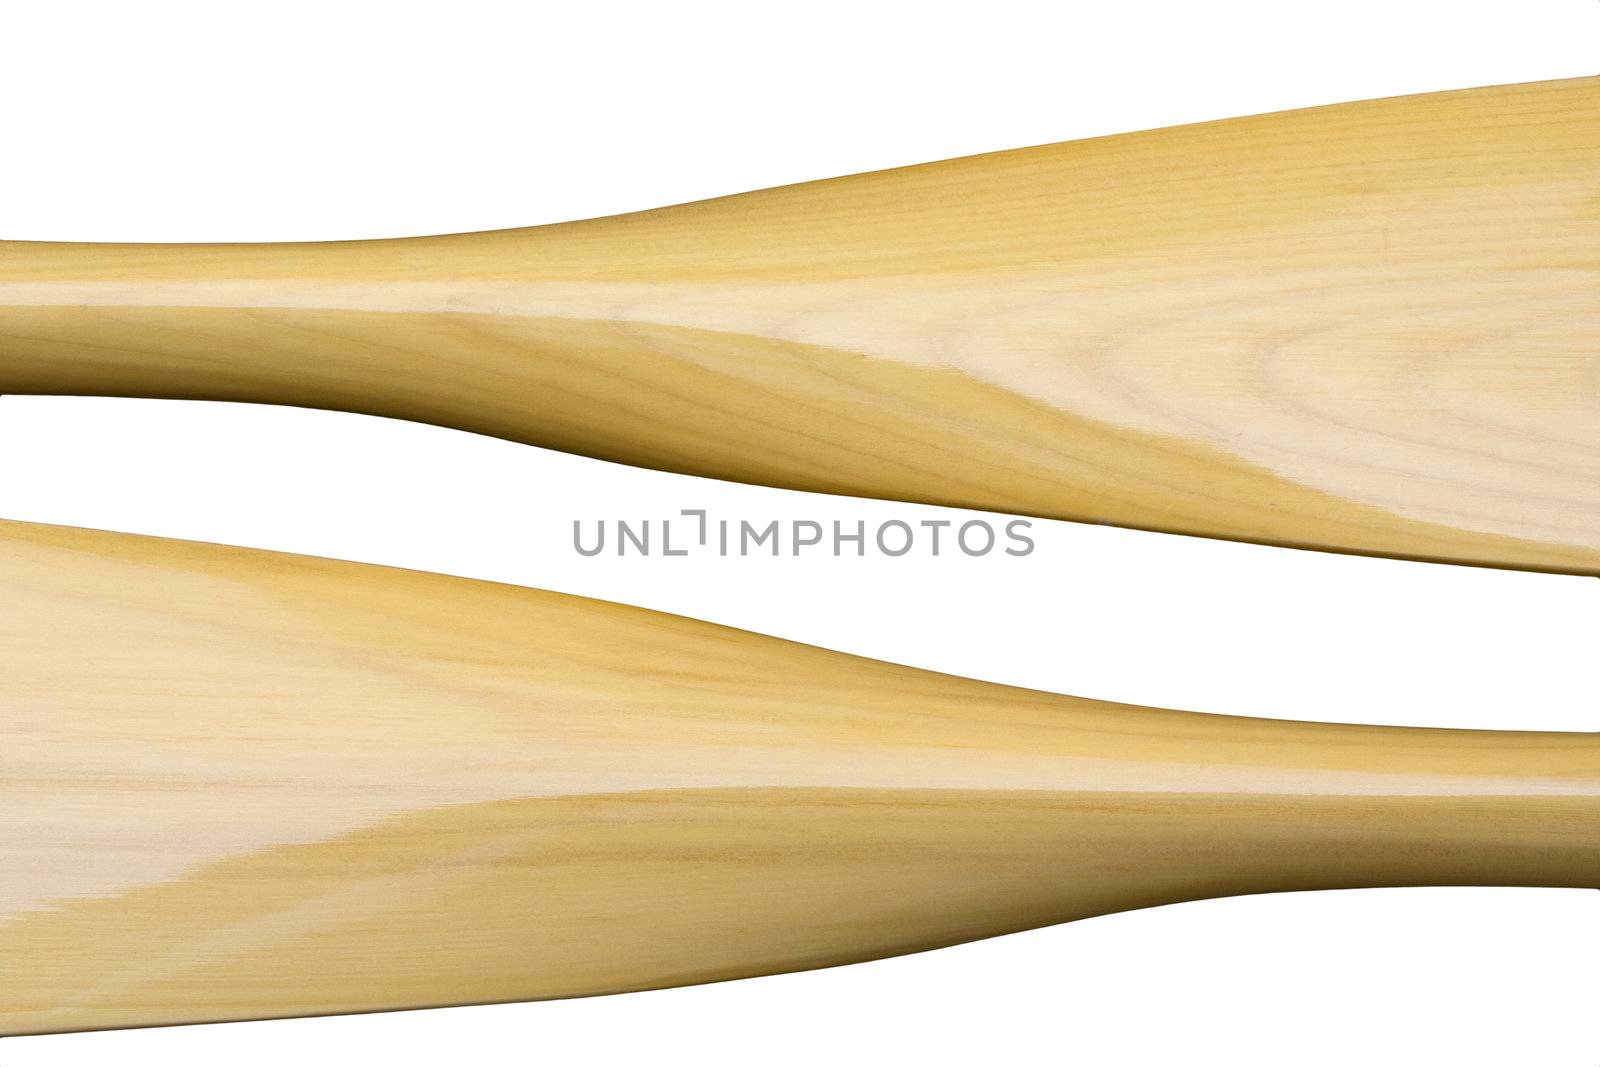 Wooden rowing oars abstract. Isolated on white, clipping paths.